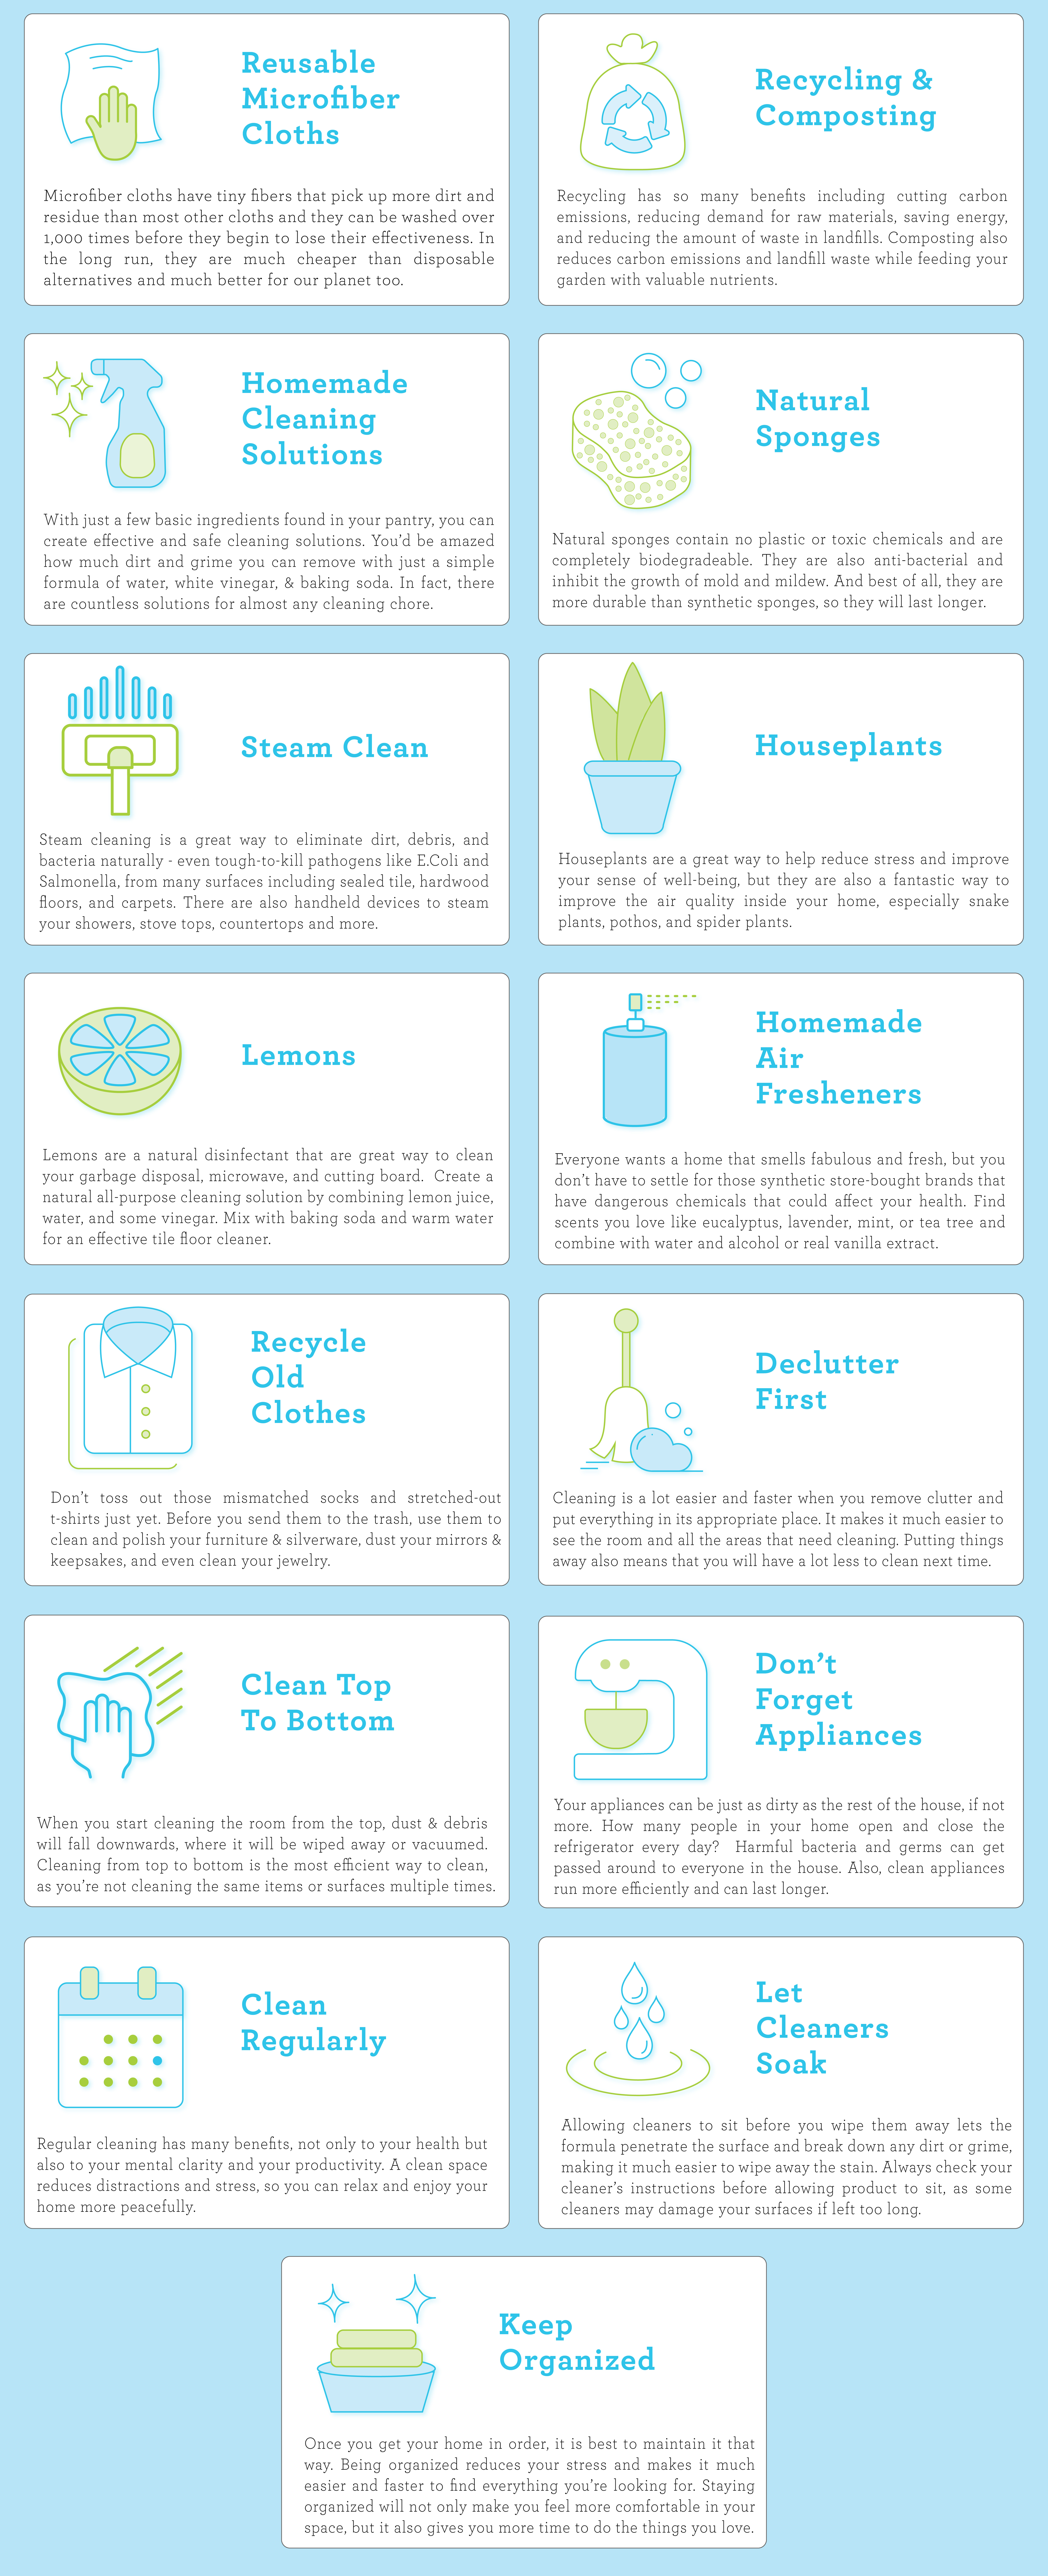 green cleaning tips for Miami